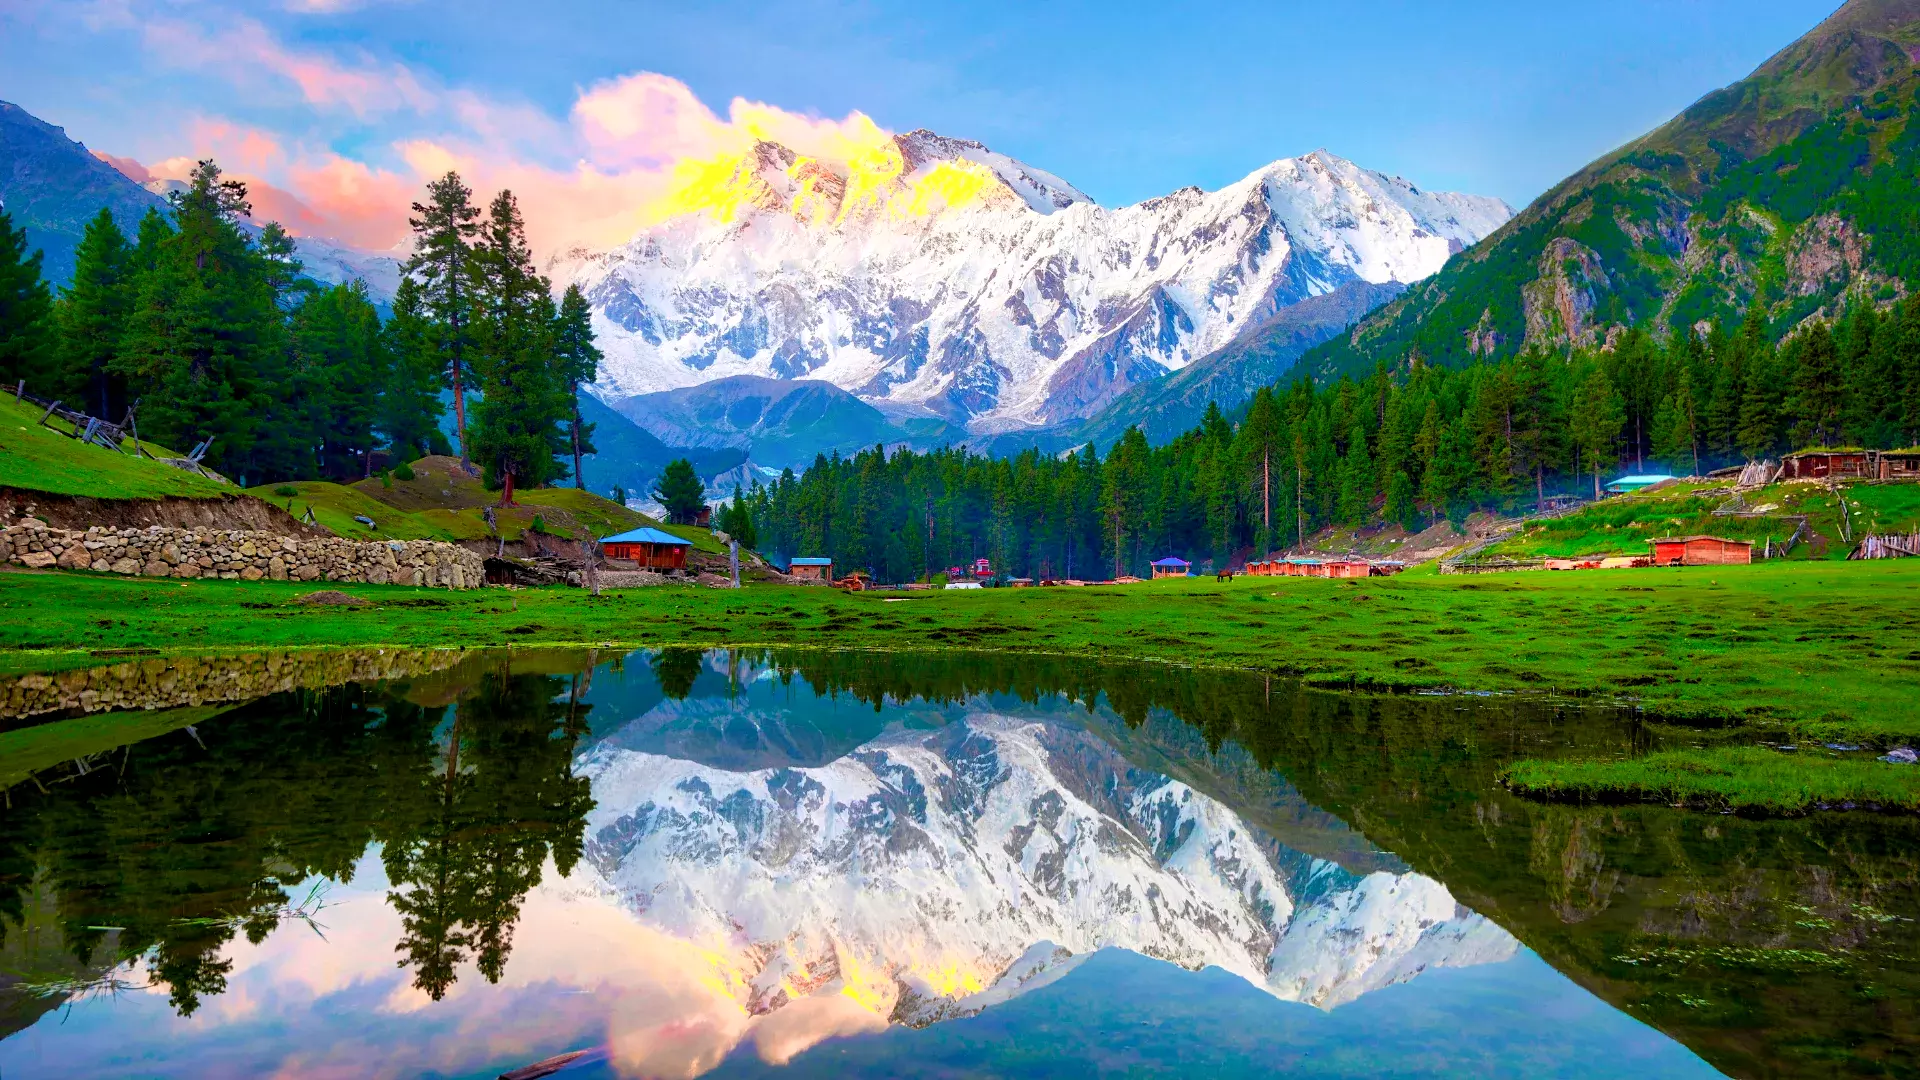 Reflection Pond at Fairy Meadows with Nanga Parbat in the background, Pakistan, showcasing clear water reflecting the towering snow-capped mountain and lush greenery.